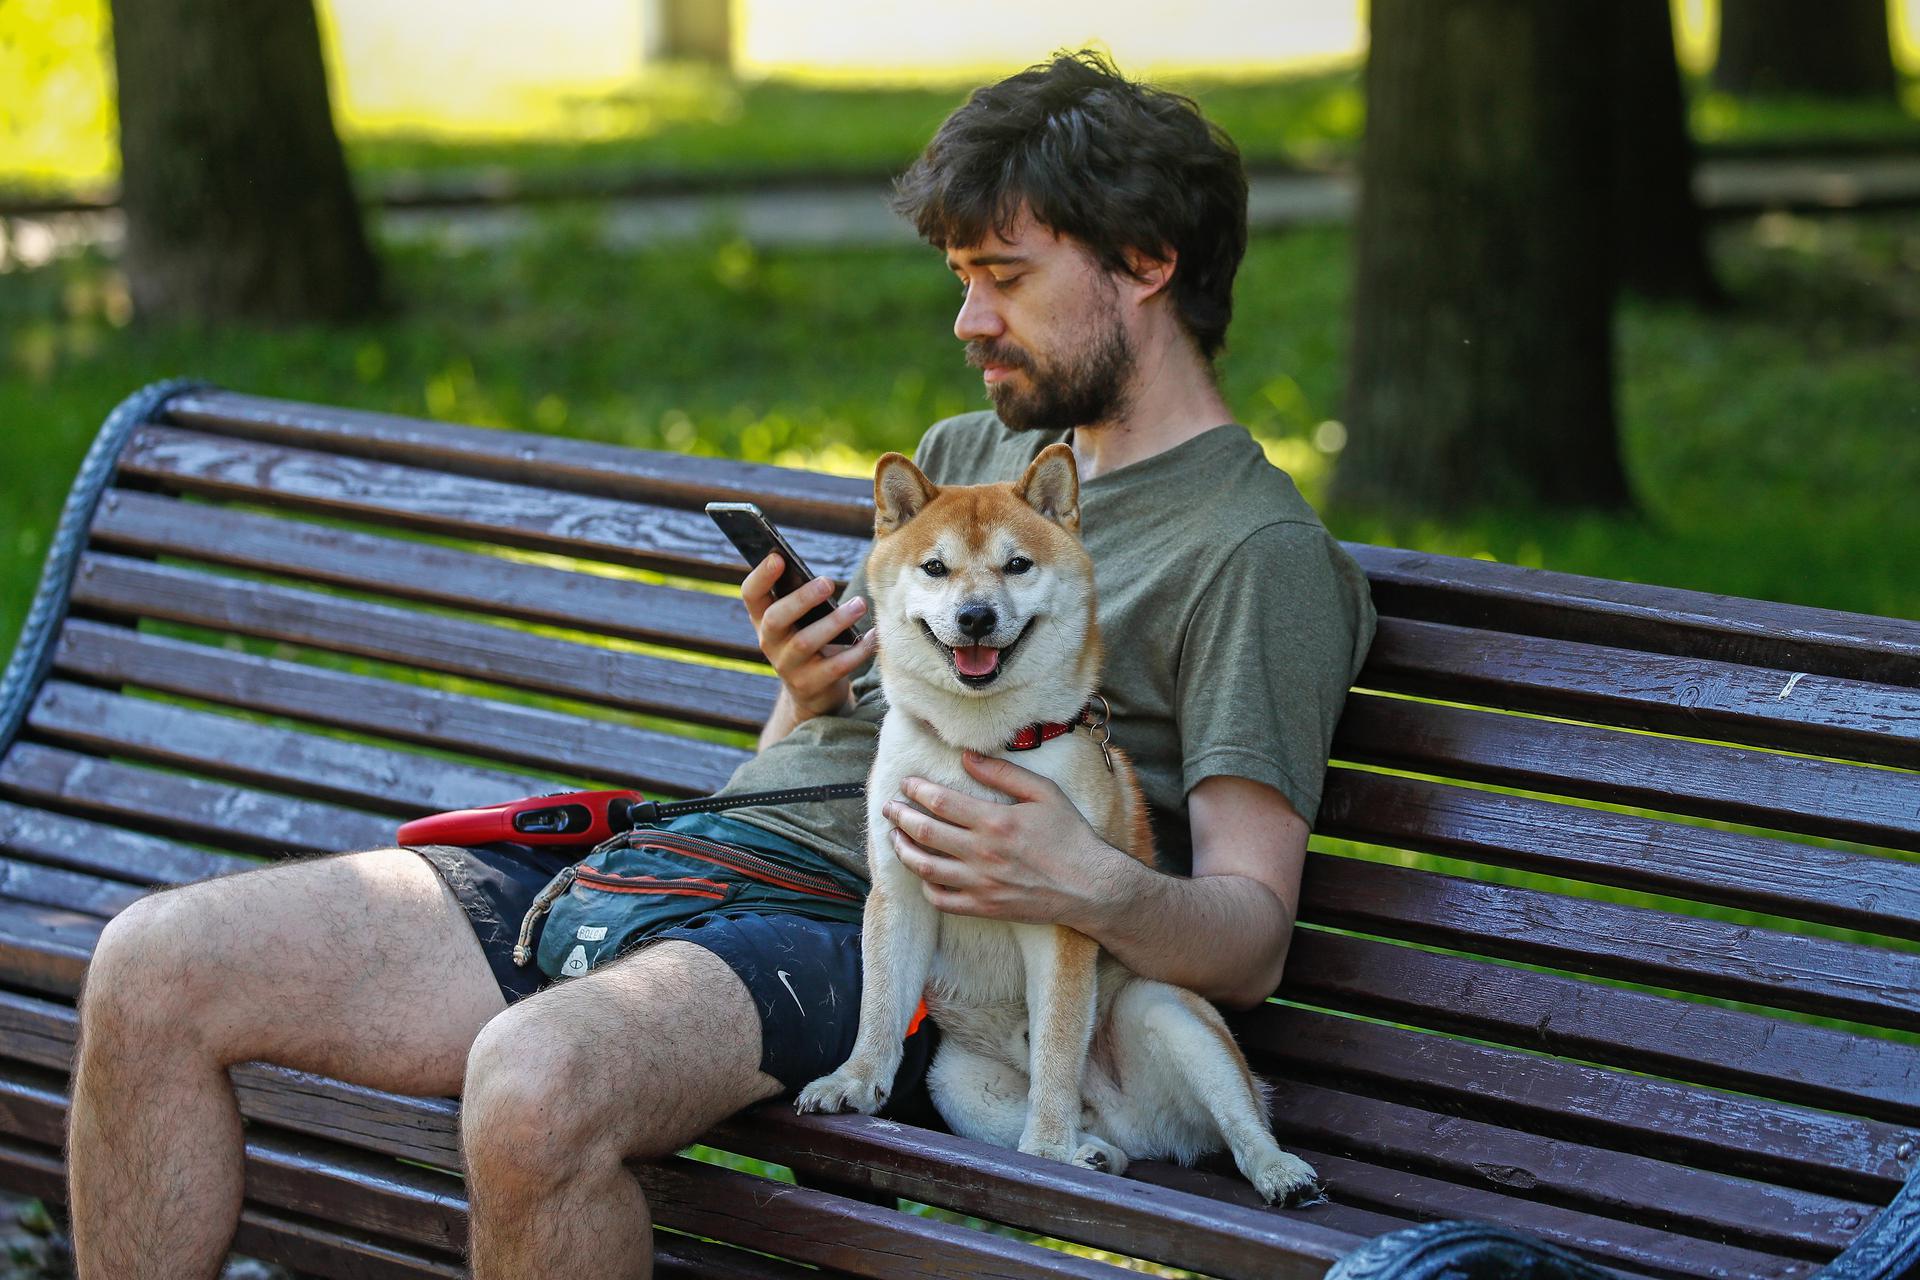 Man with a Dog on a Bench